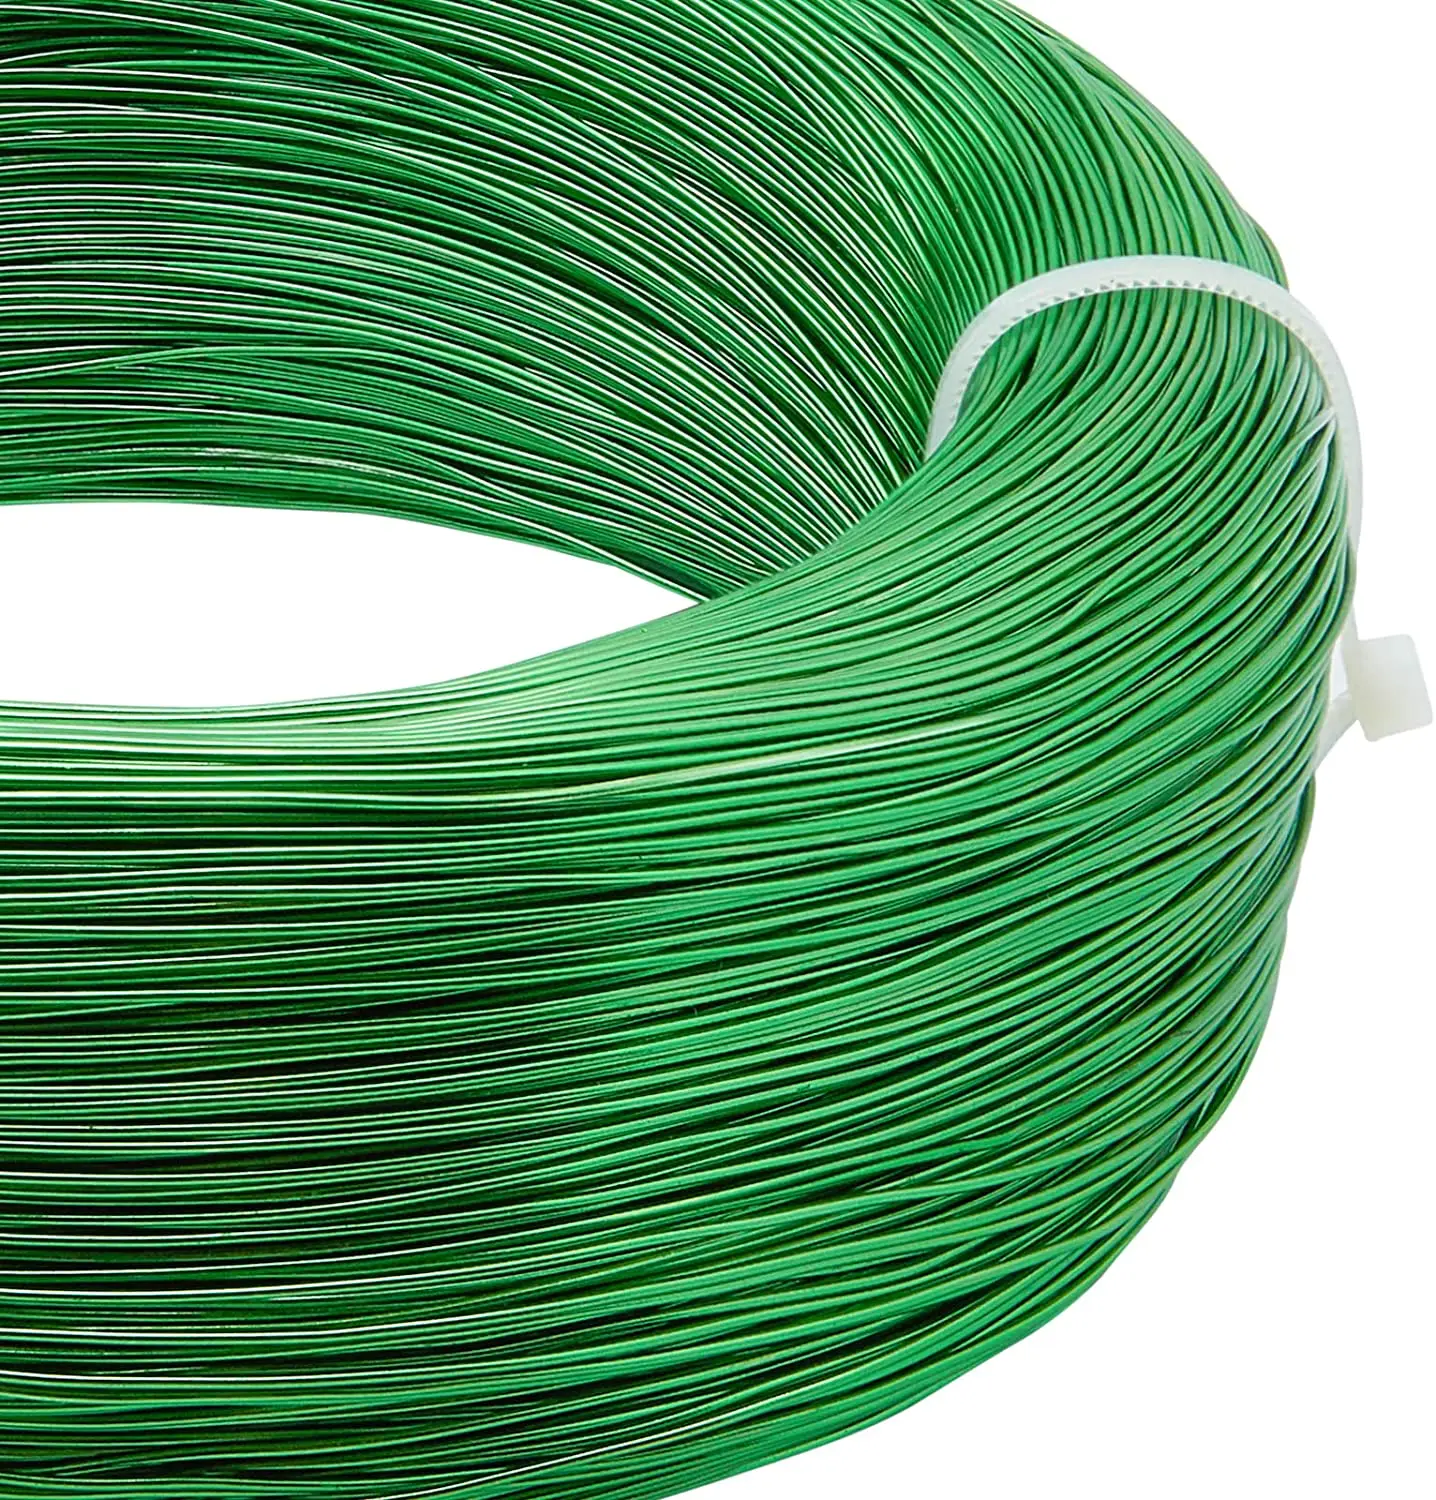 

918 Feet 22 Gauge Aluminum Wire Bendable Metal Sculpting Wire for Beading Jewelry Making Art and Chrismas Craft Project Green